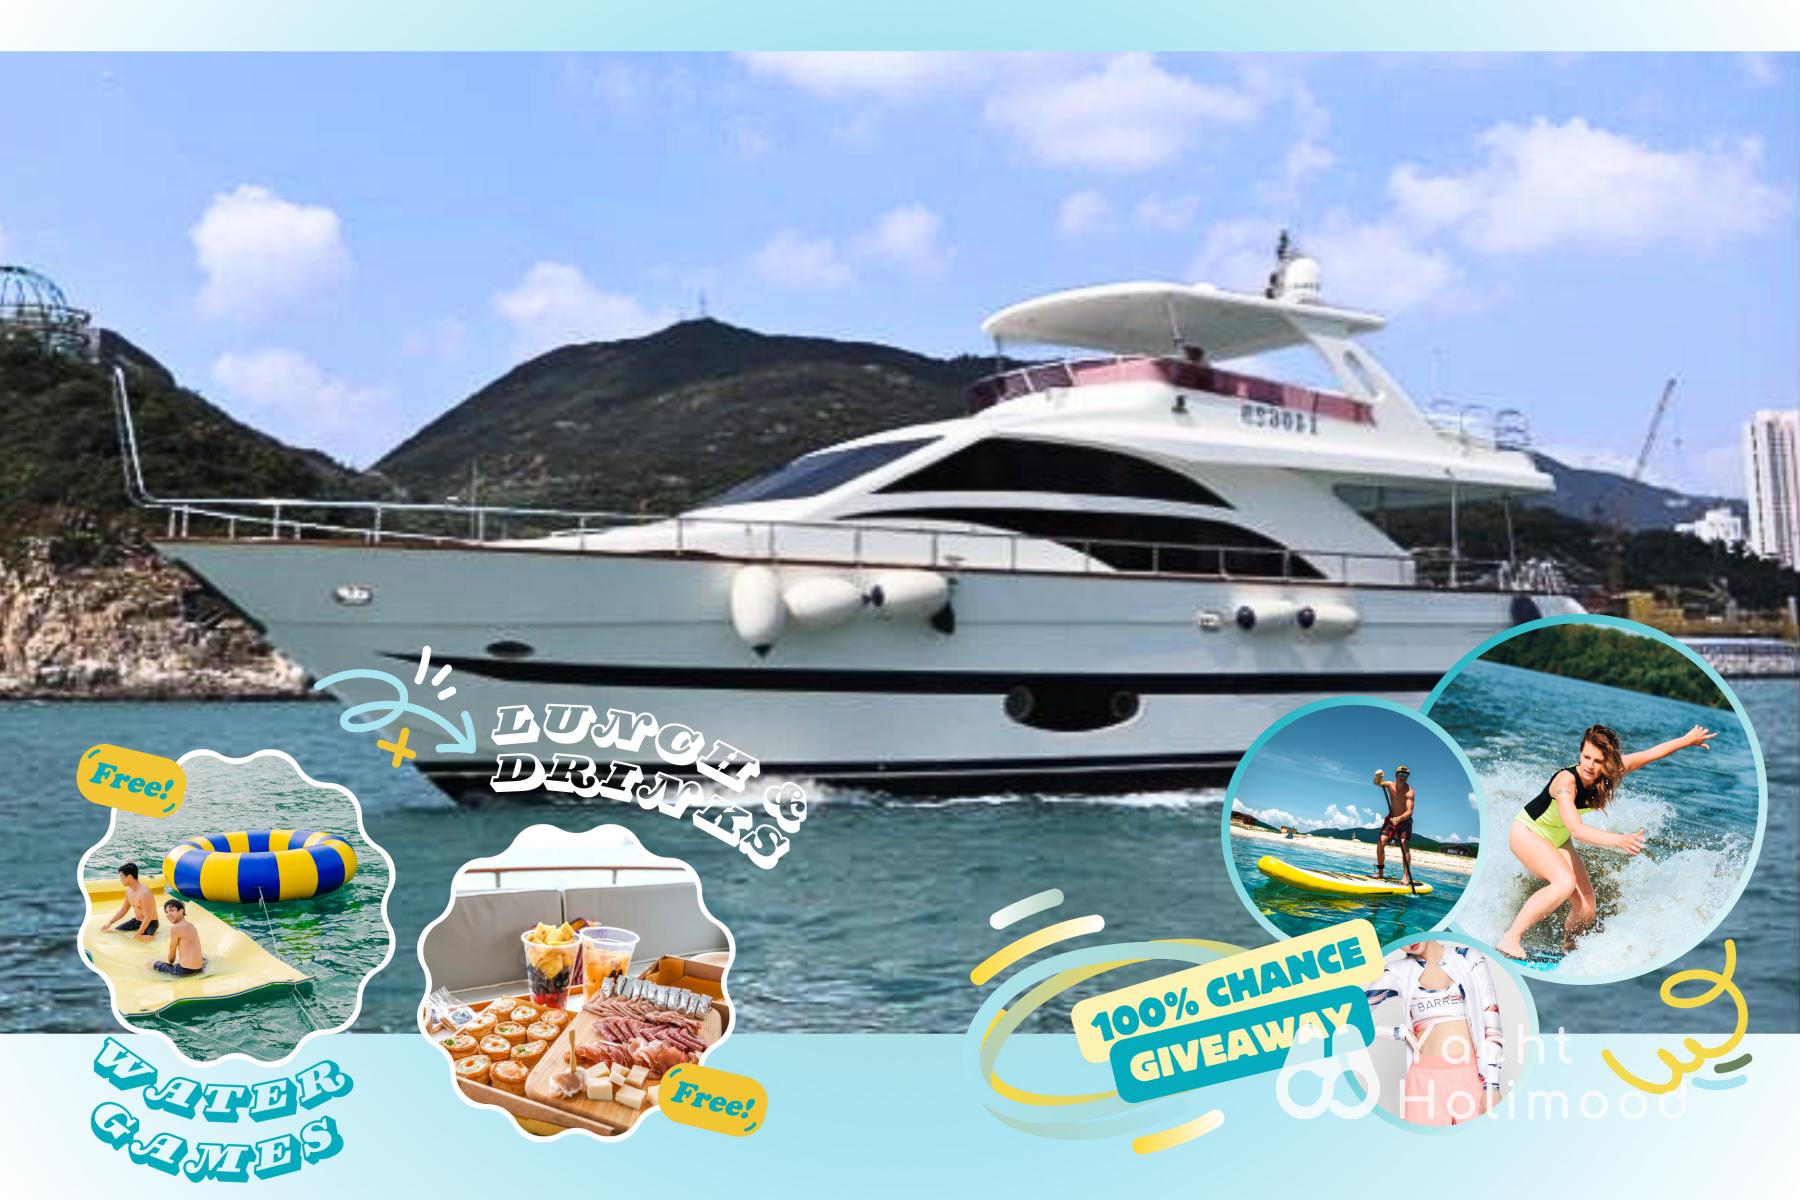 IE02 [Hero] Cruiser All-Inclusive Package (Includes Meals & Water Toys, Let's win Wakesurfing experience!) 1